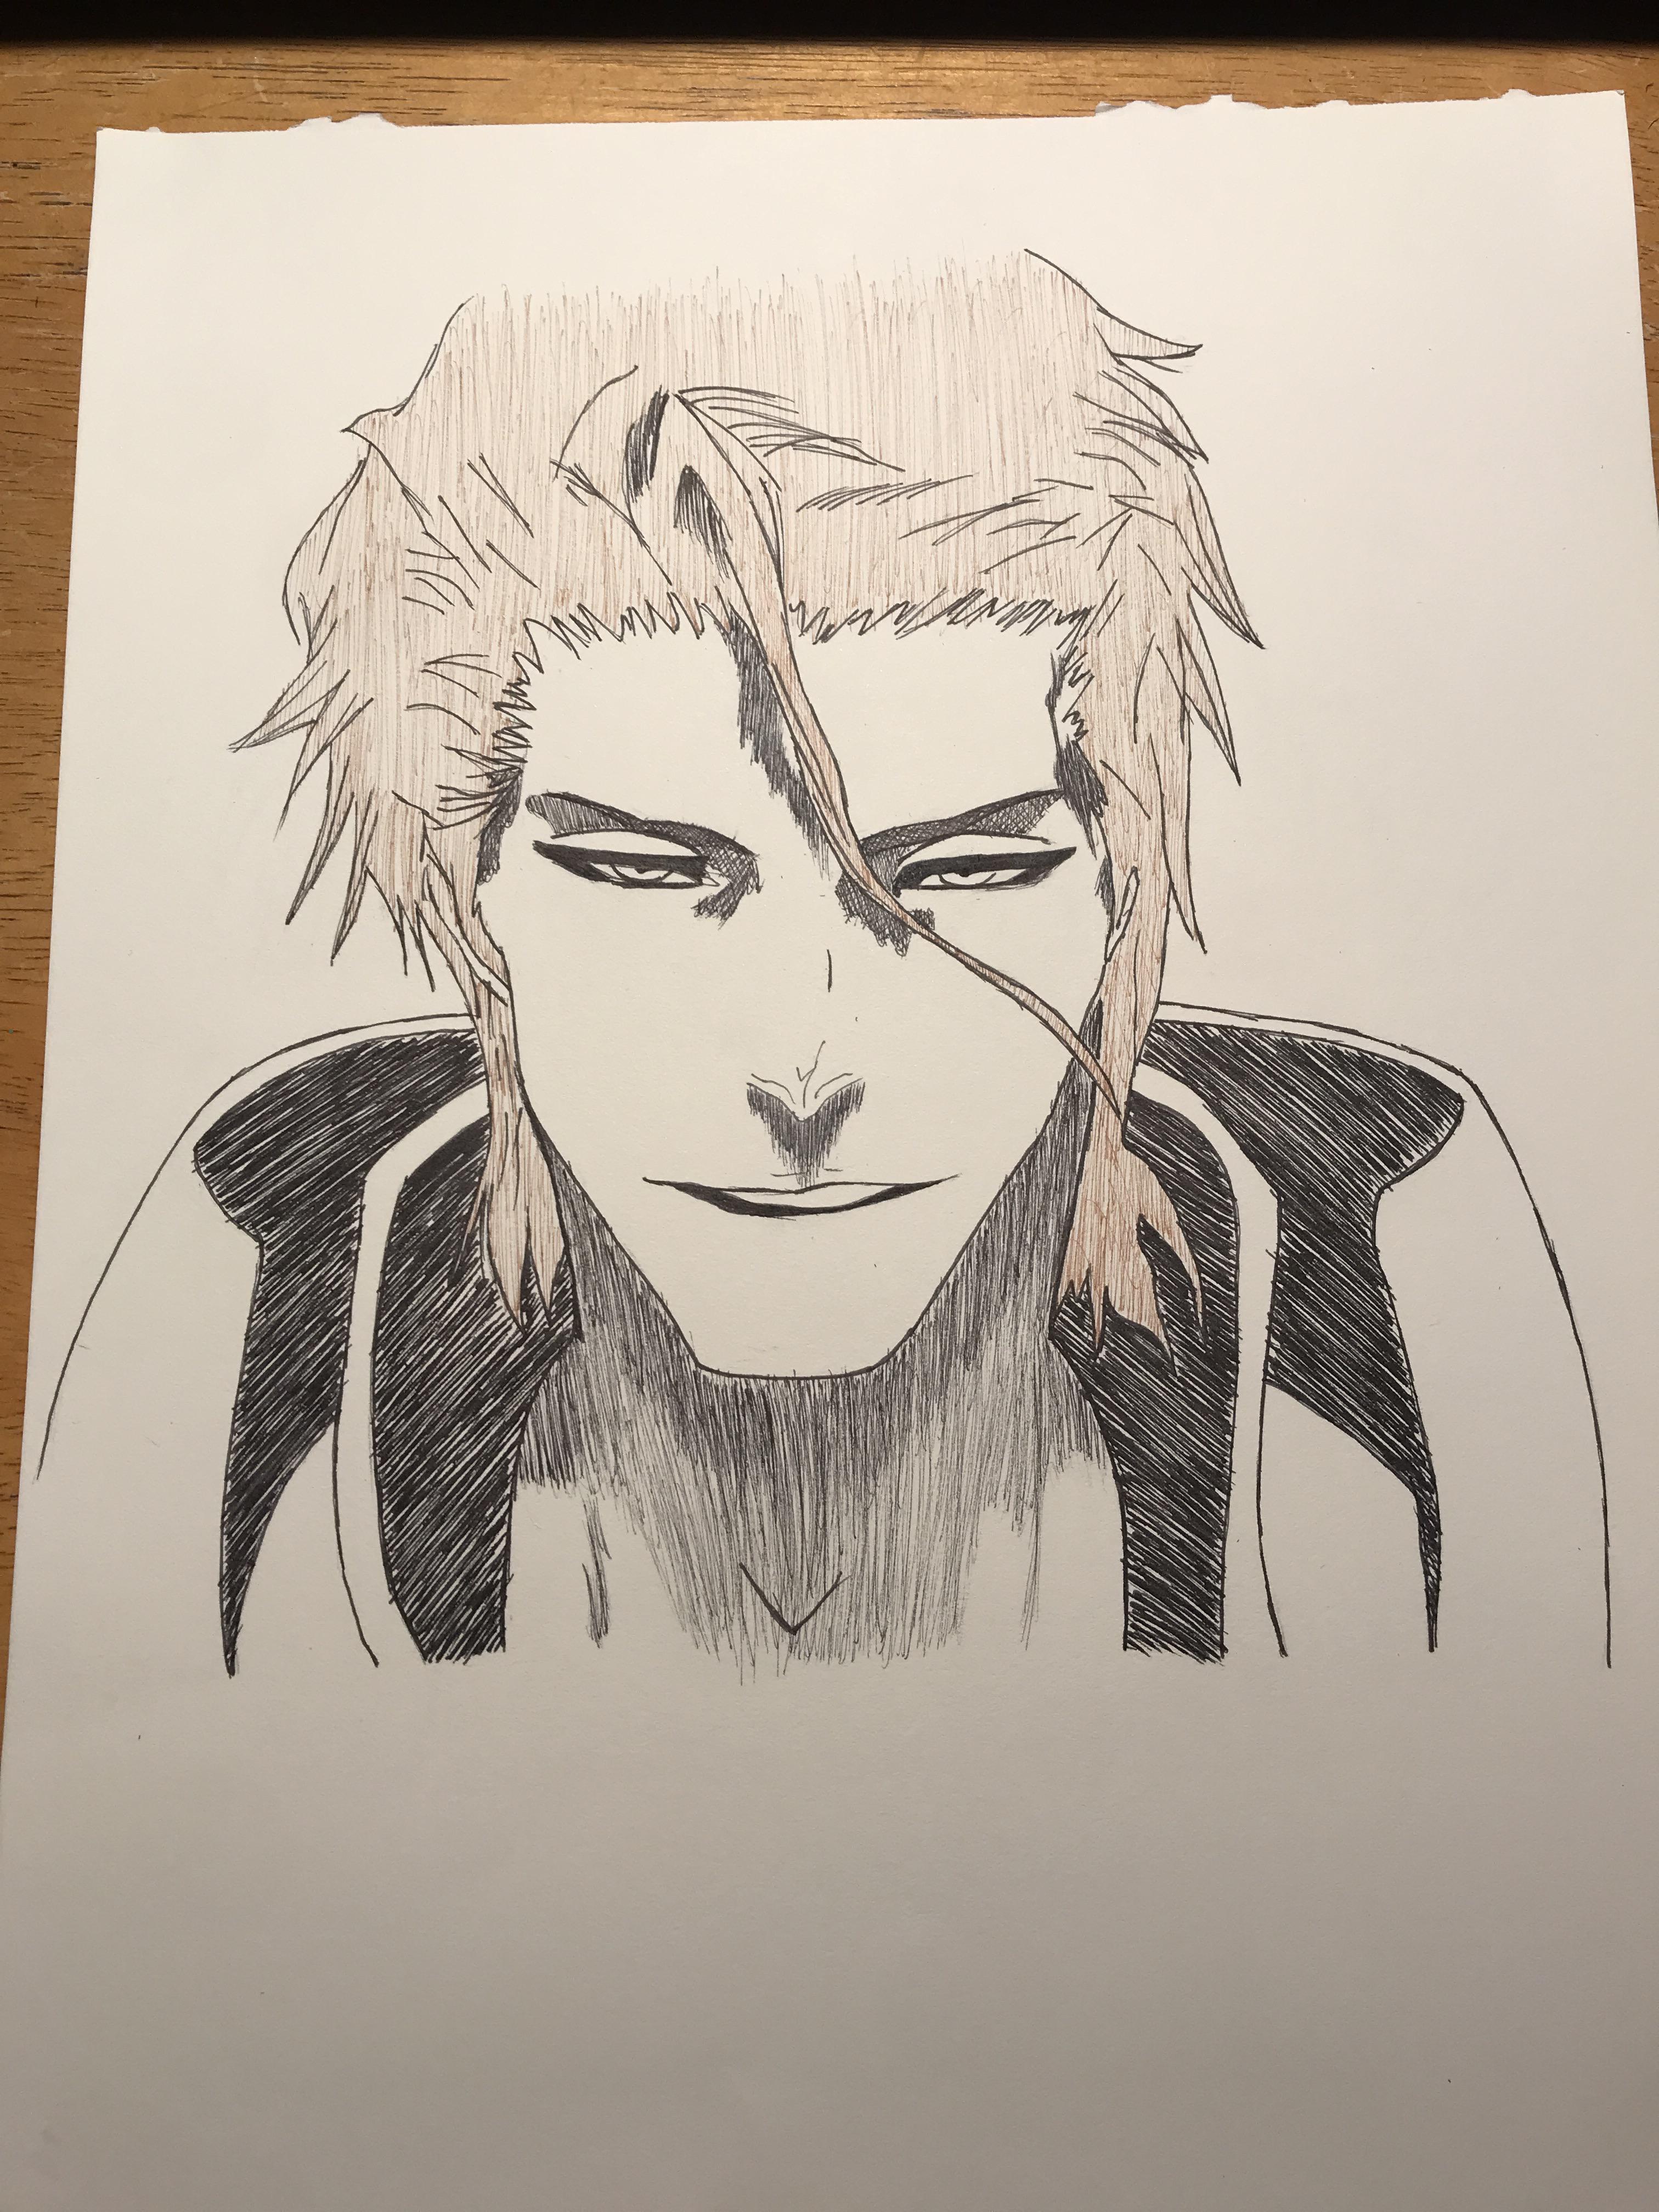 Aizen drawing by me | Scrolller